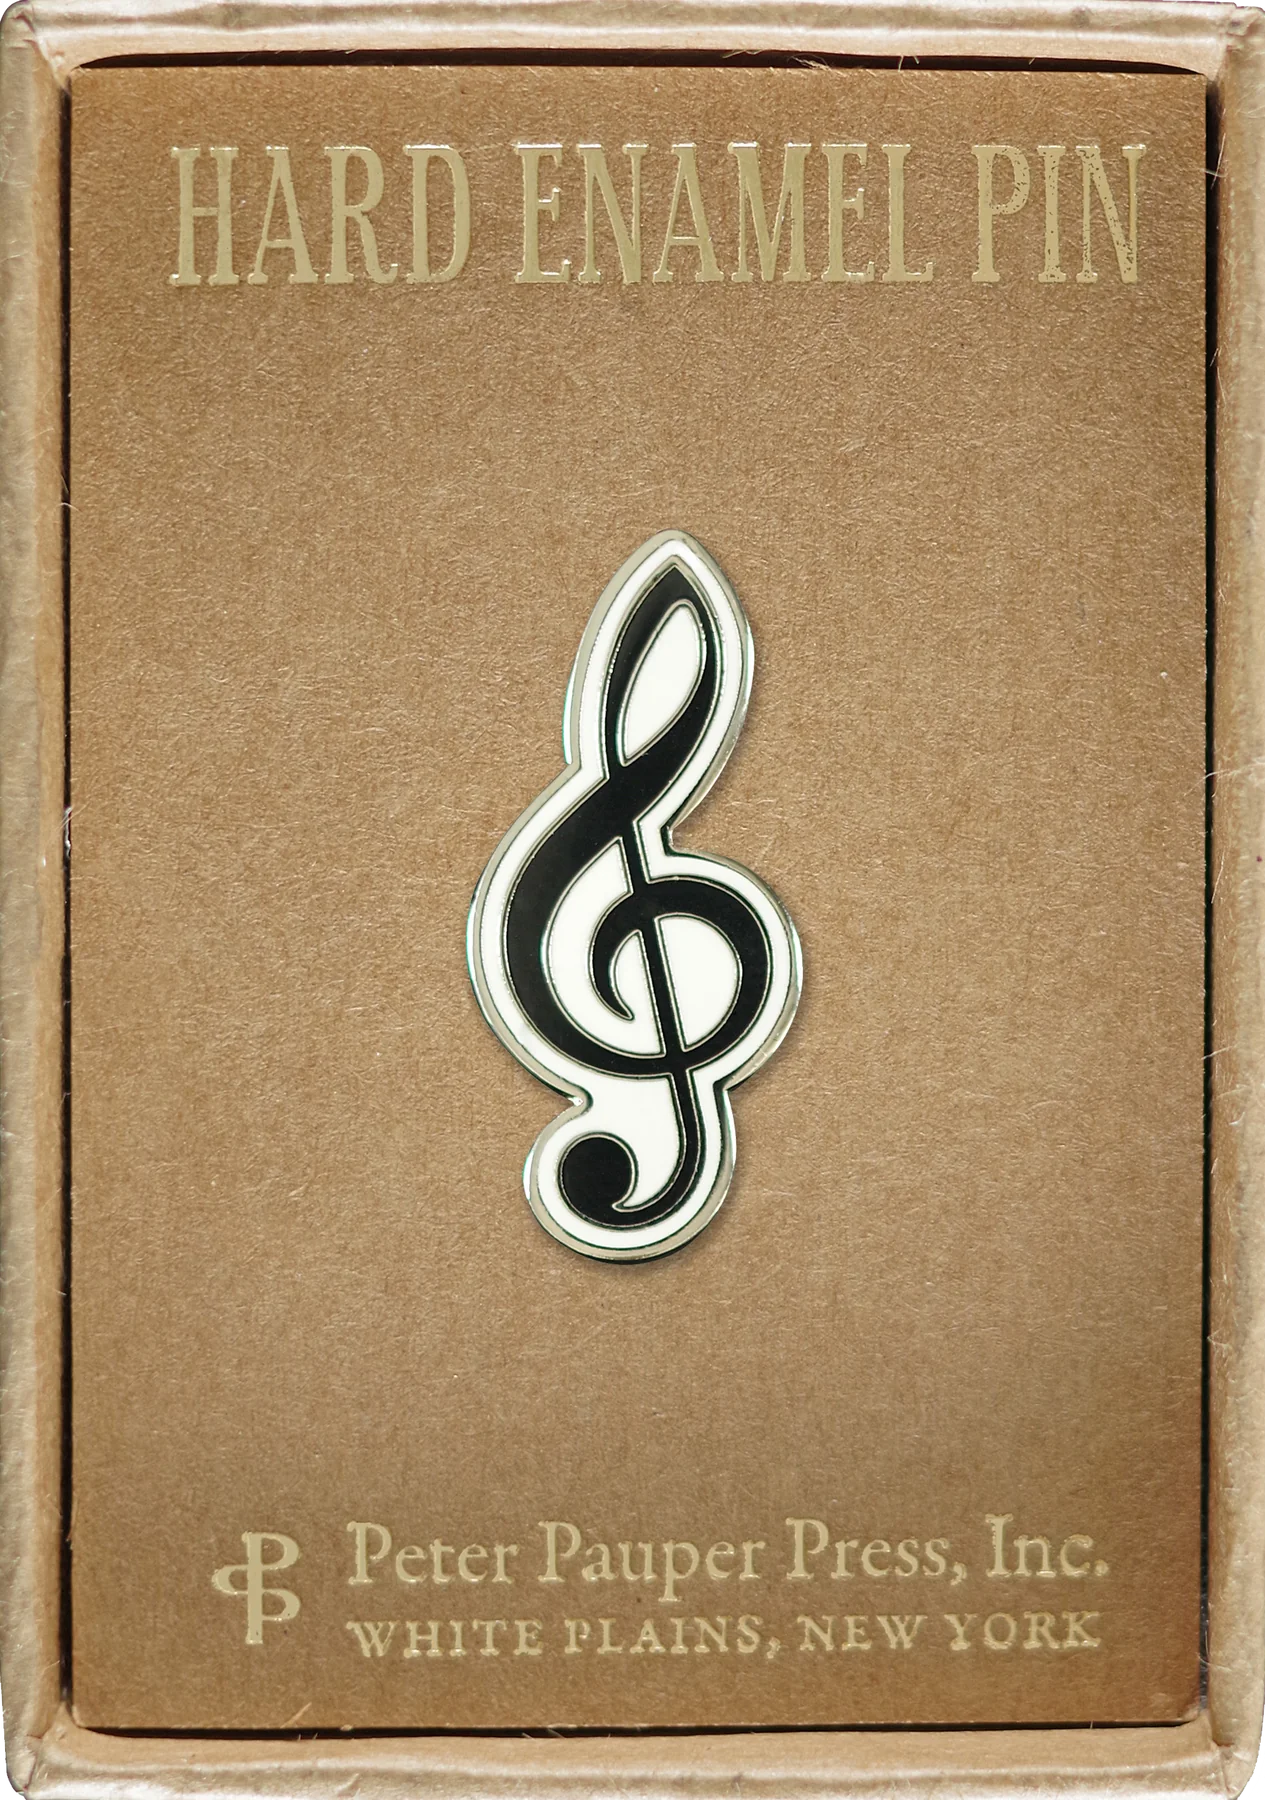 Black treble clef with white border attached to a box with text that reads hard enamel pin